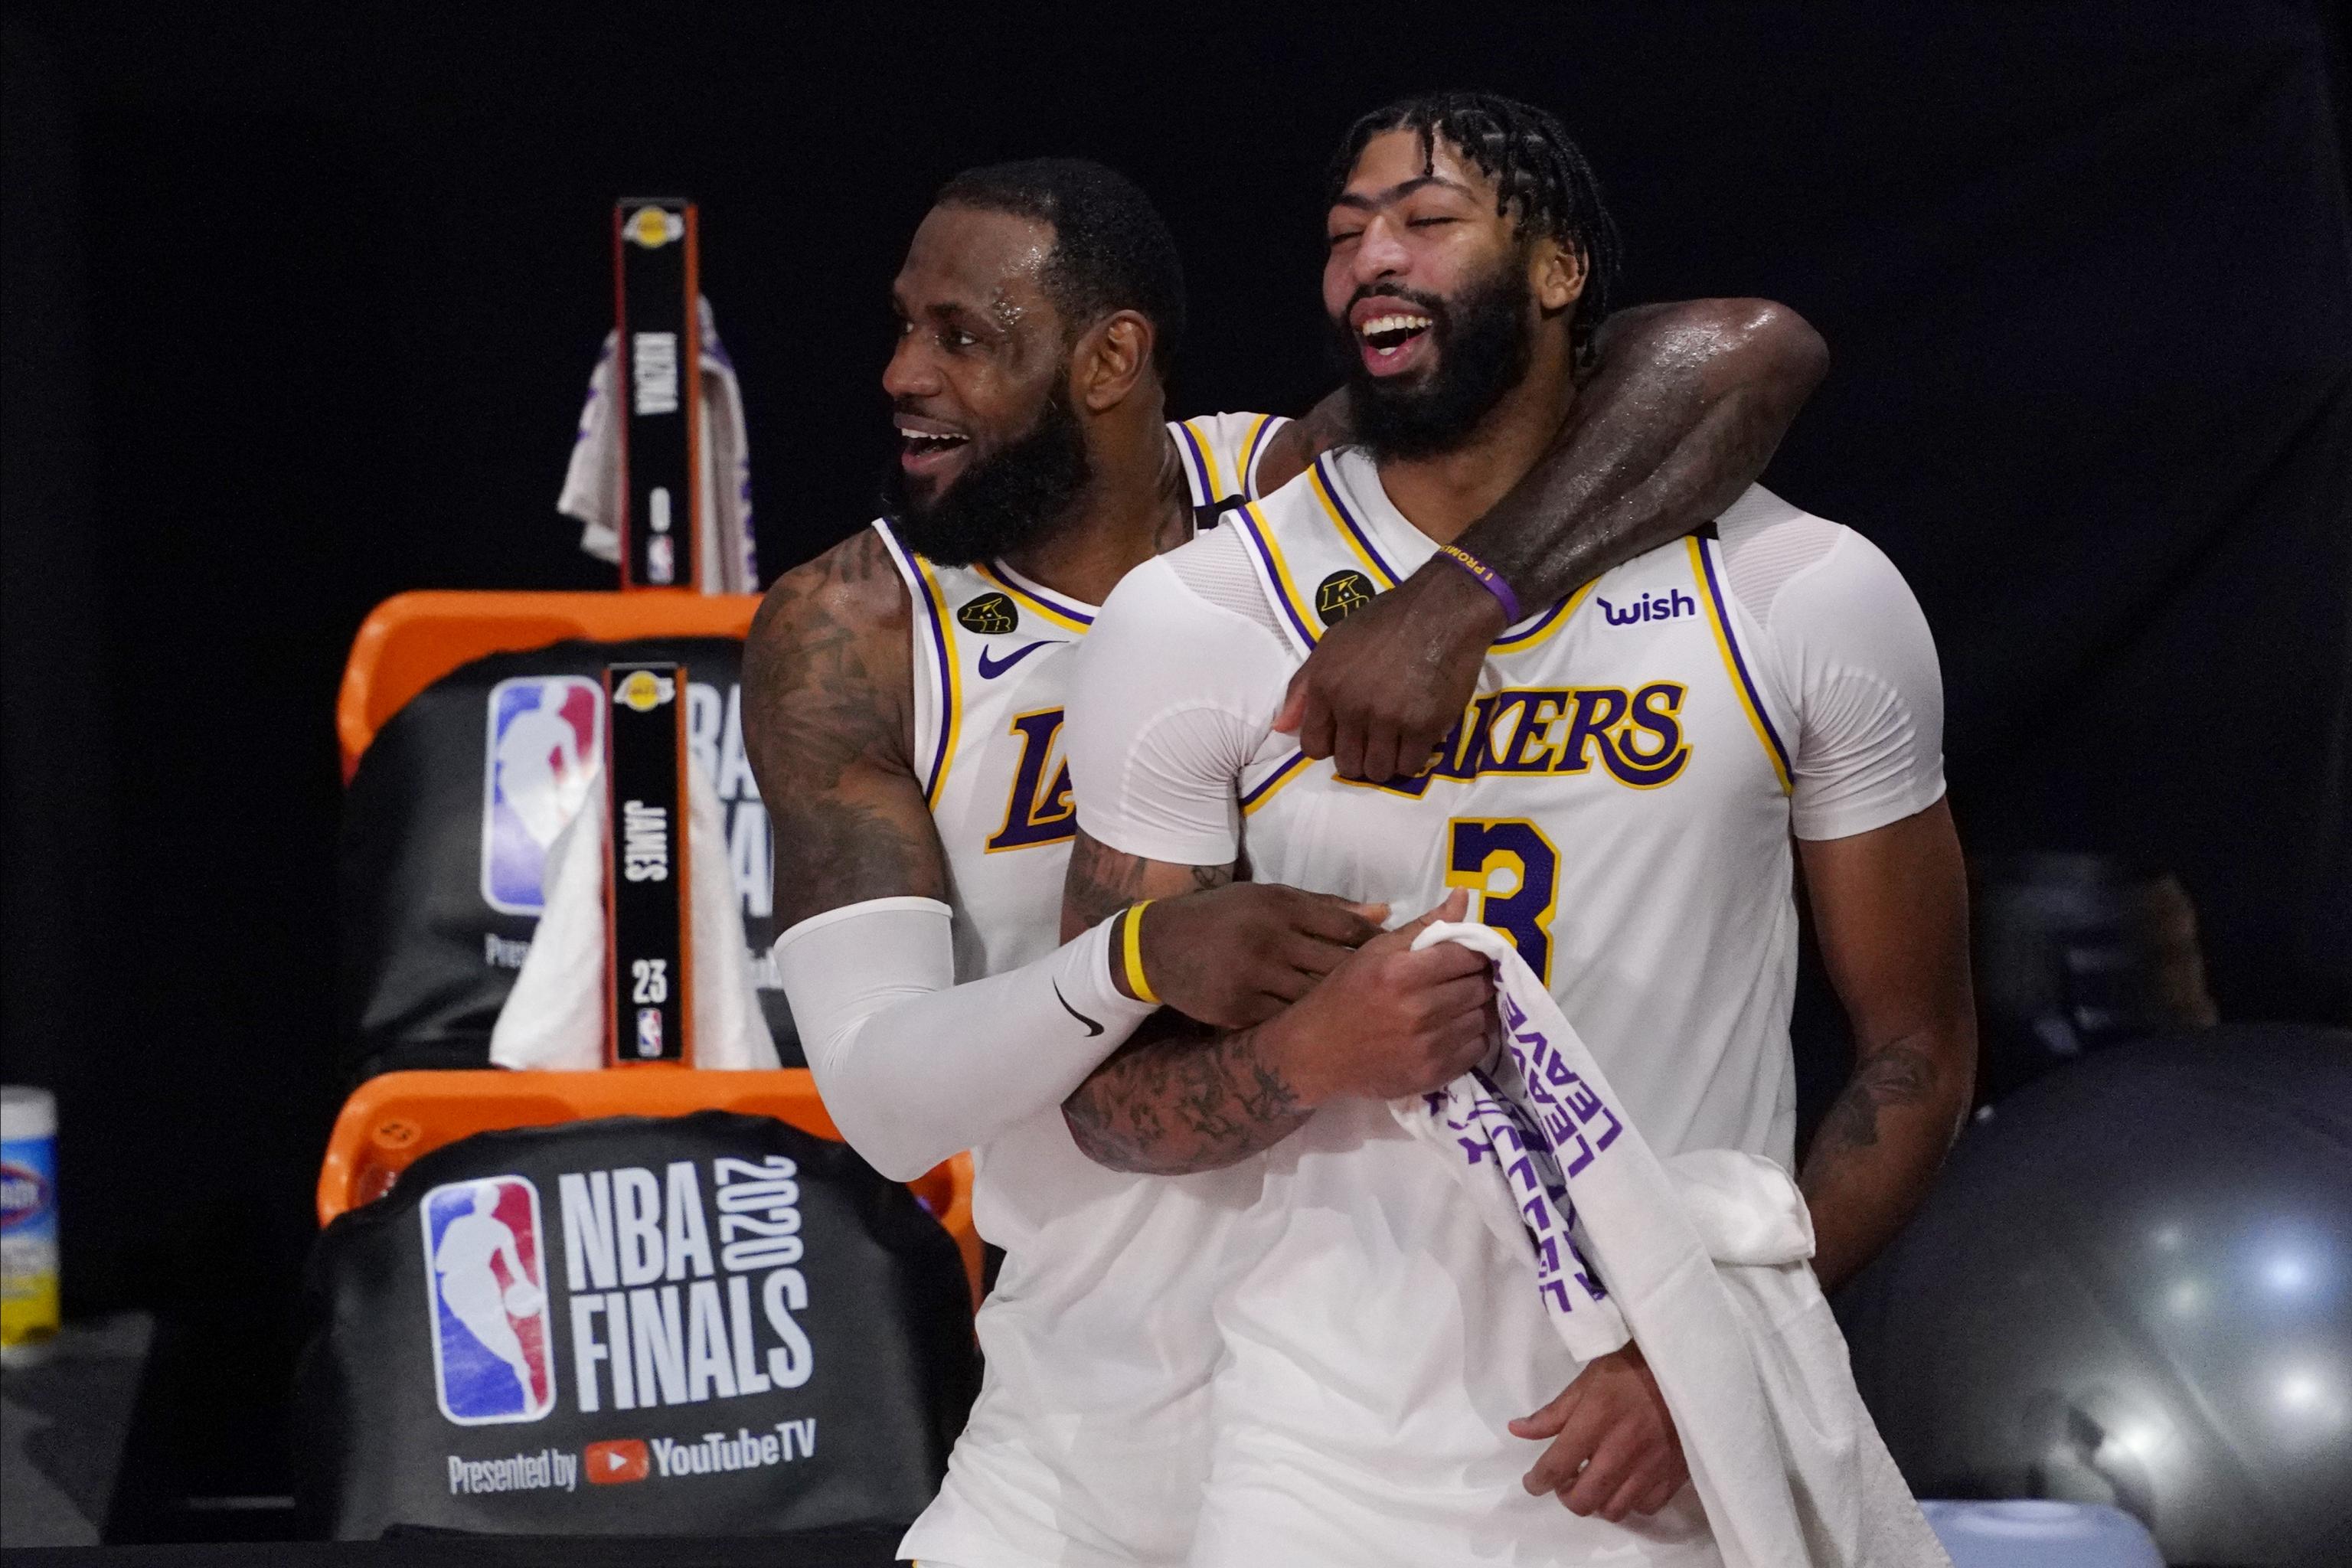 The Lakers are now title favorites